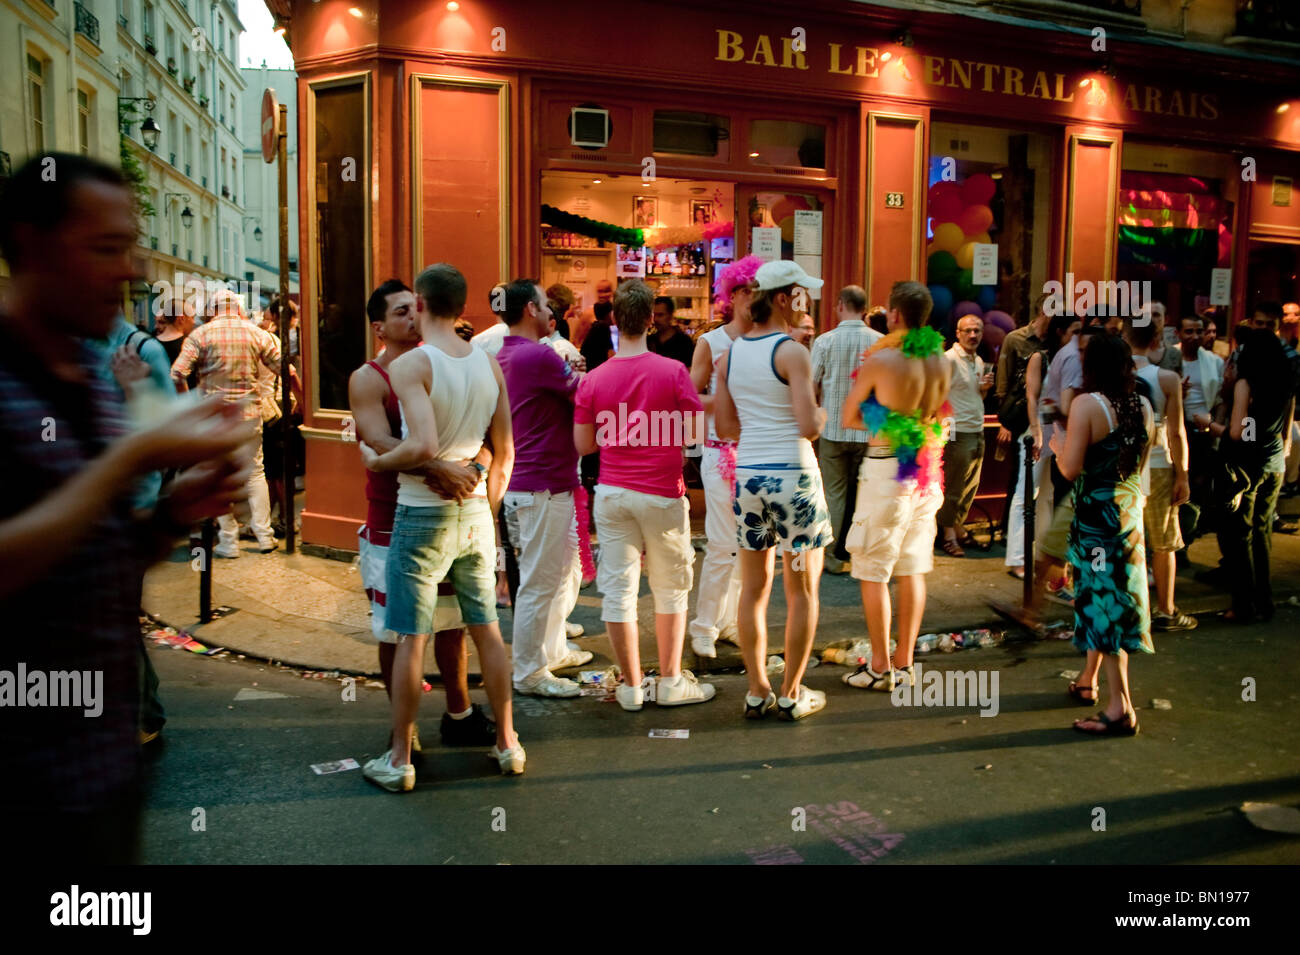 12 Gay Bars For An Unforgettable Night Out In Paris - Jetset Times